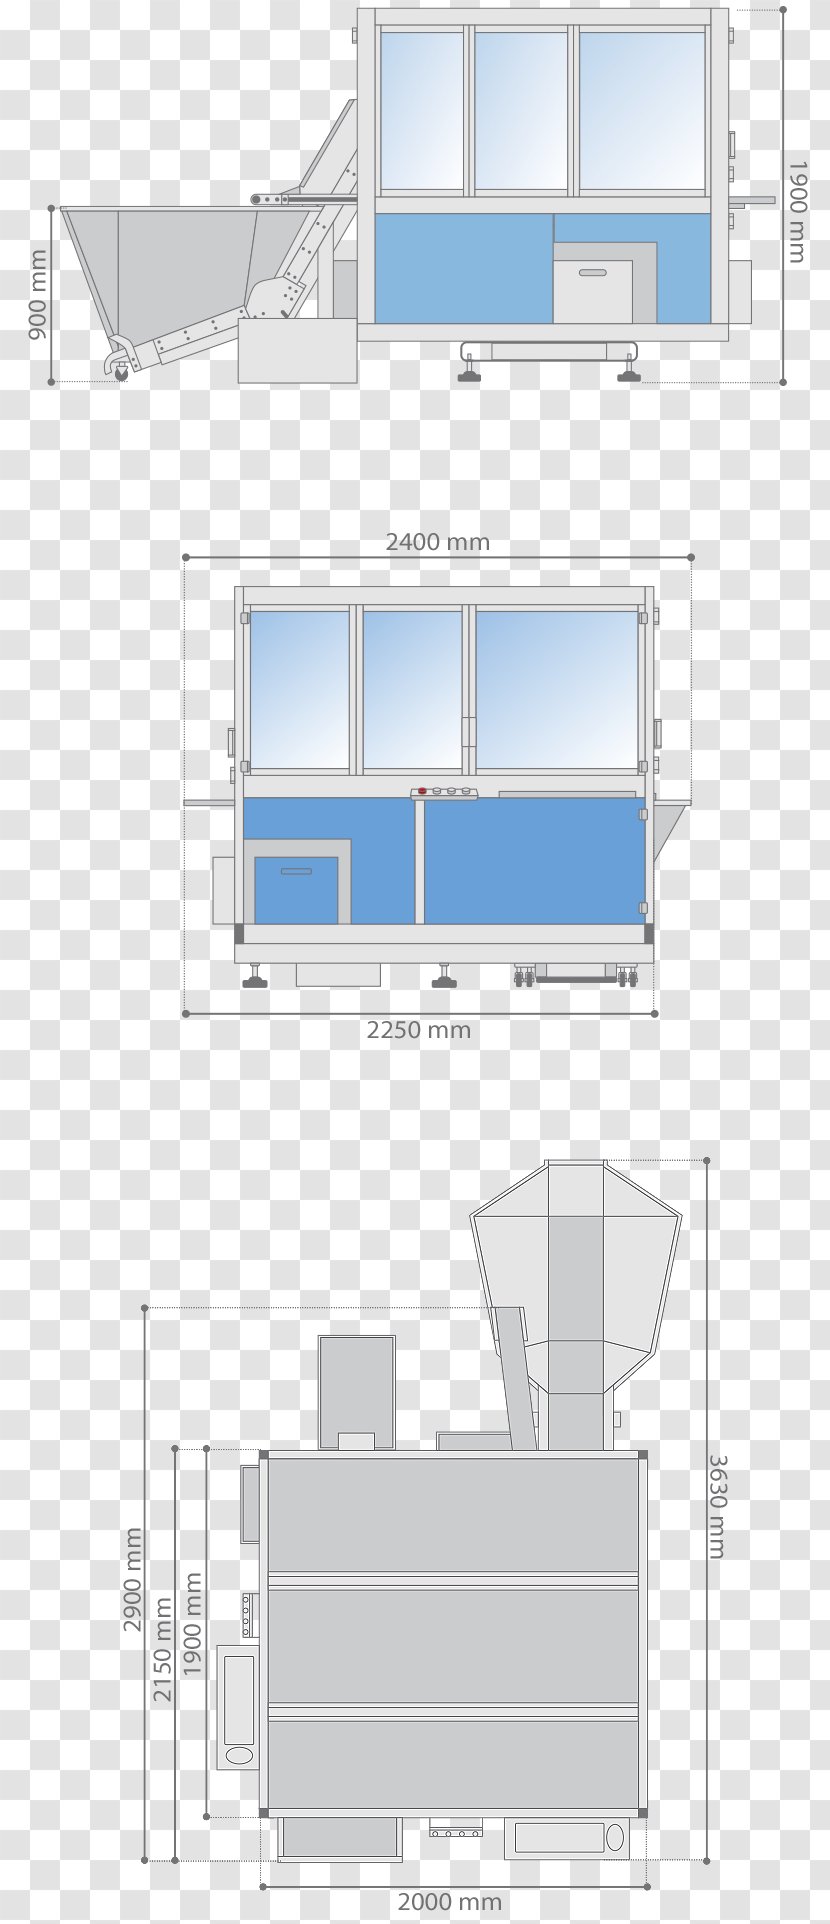 Architecture Industrial Design Furniture Product Floor Plan - Microsoft Surface - Peripheral Vision Defect Transparent PNG